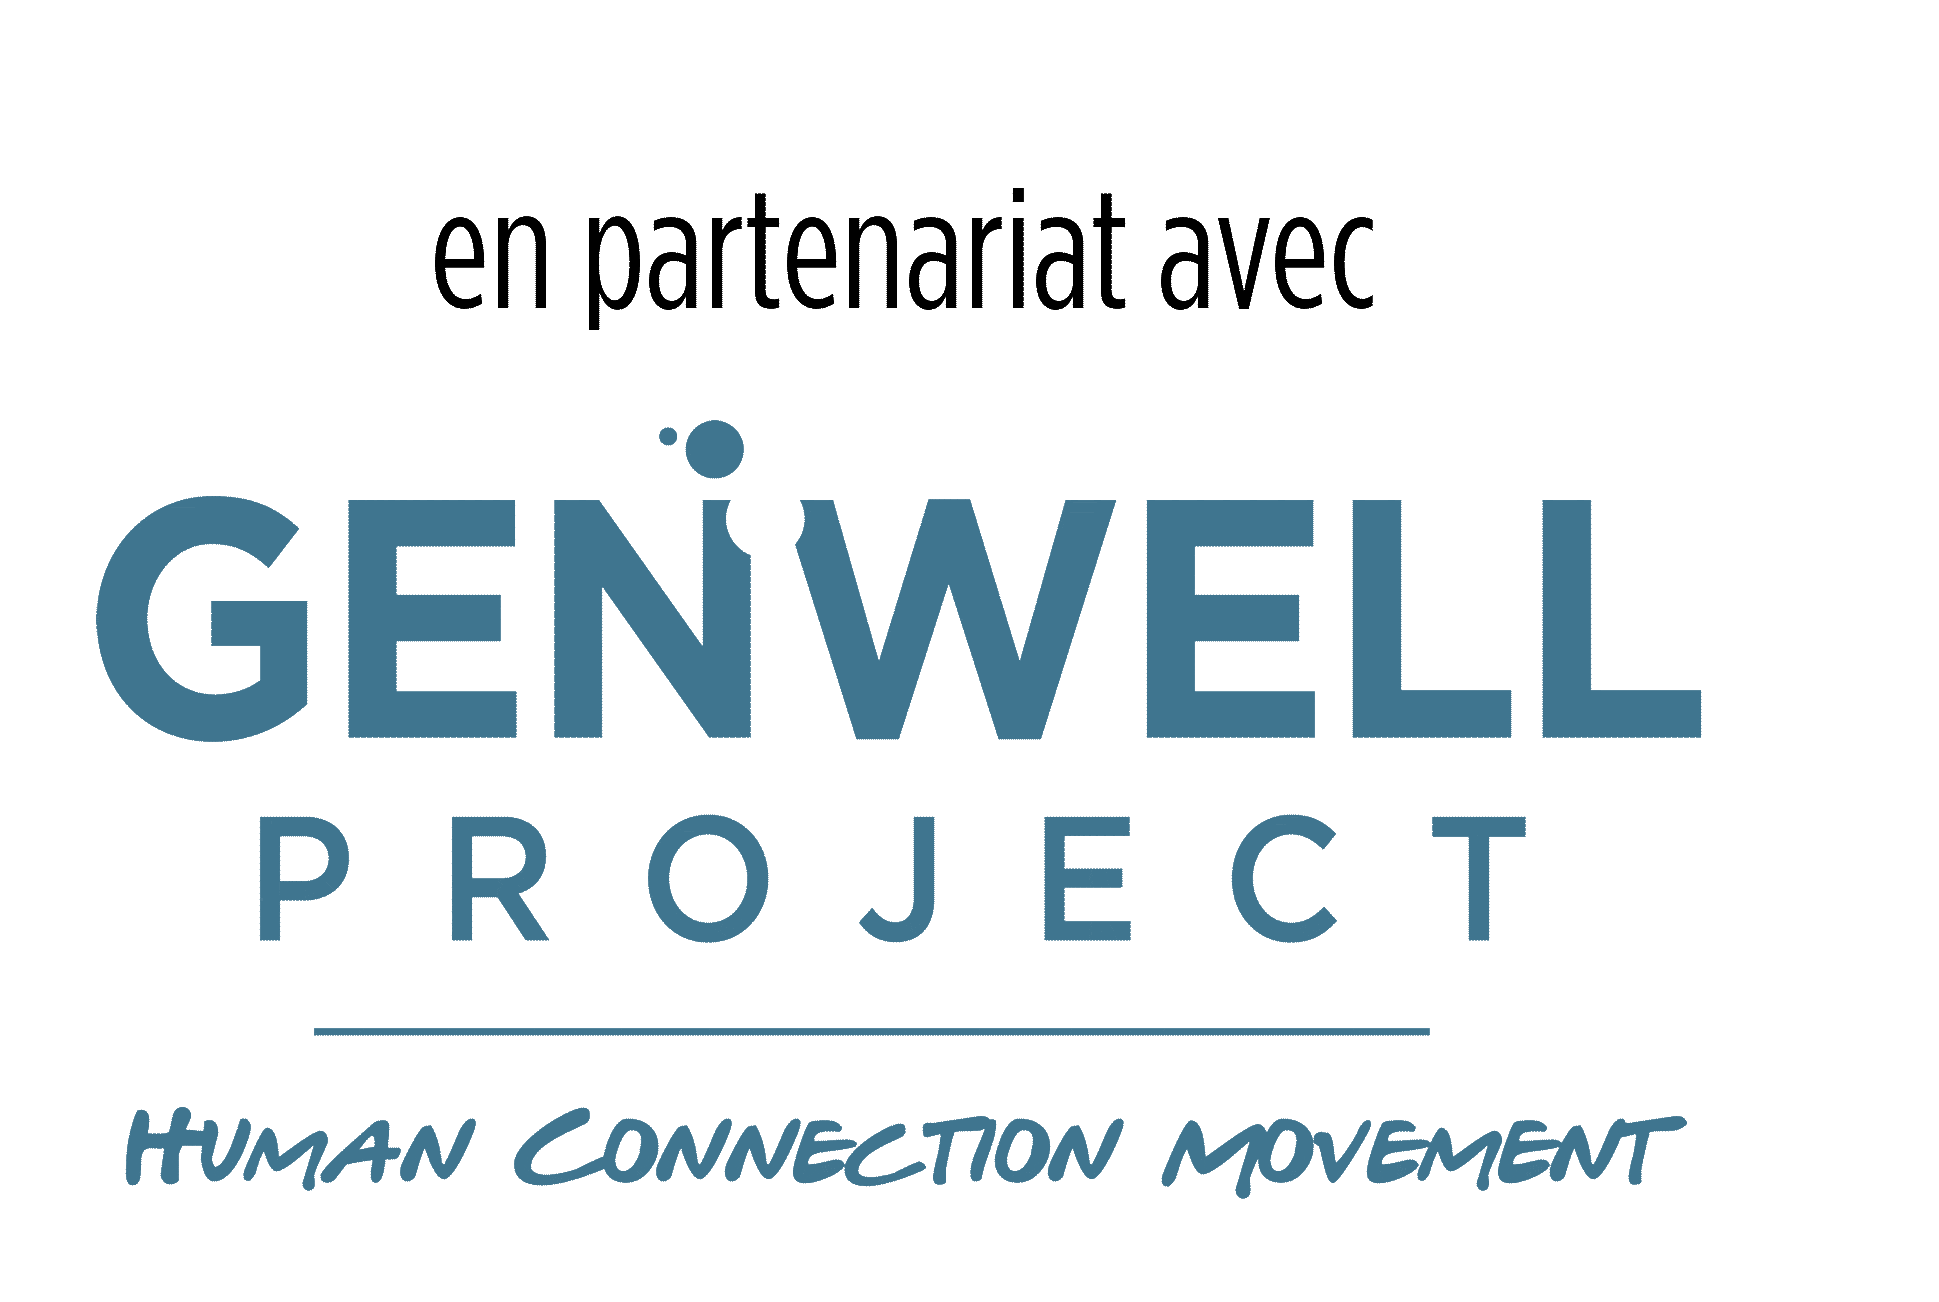 The Genwell Project